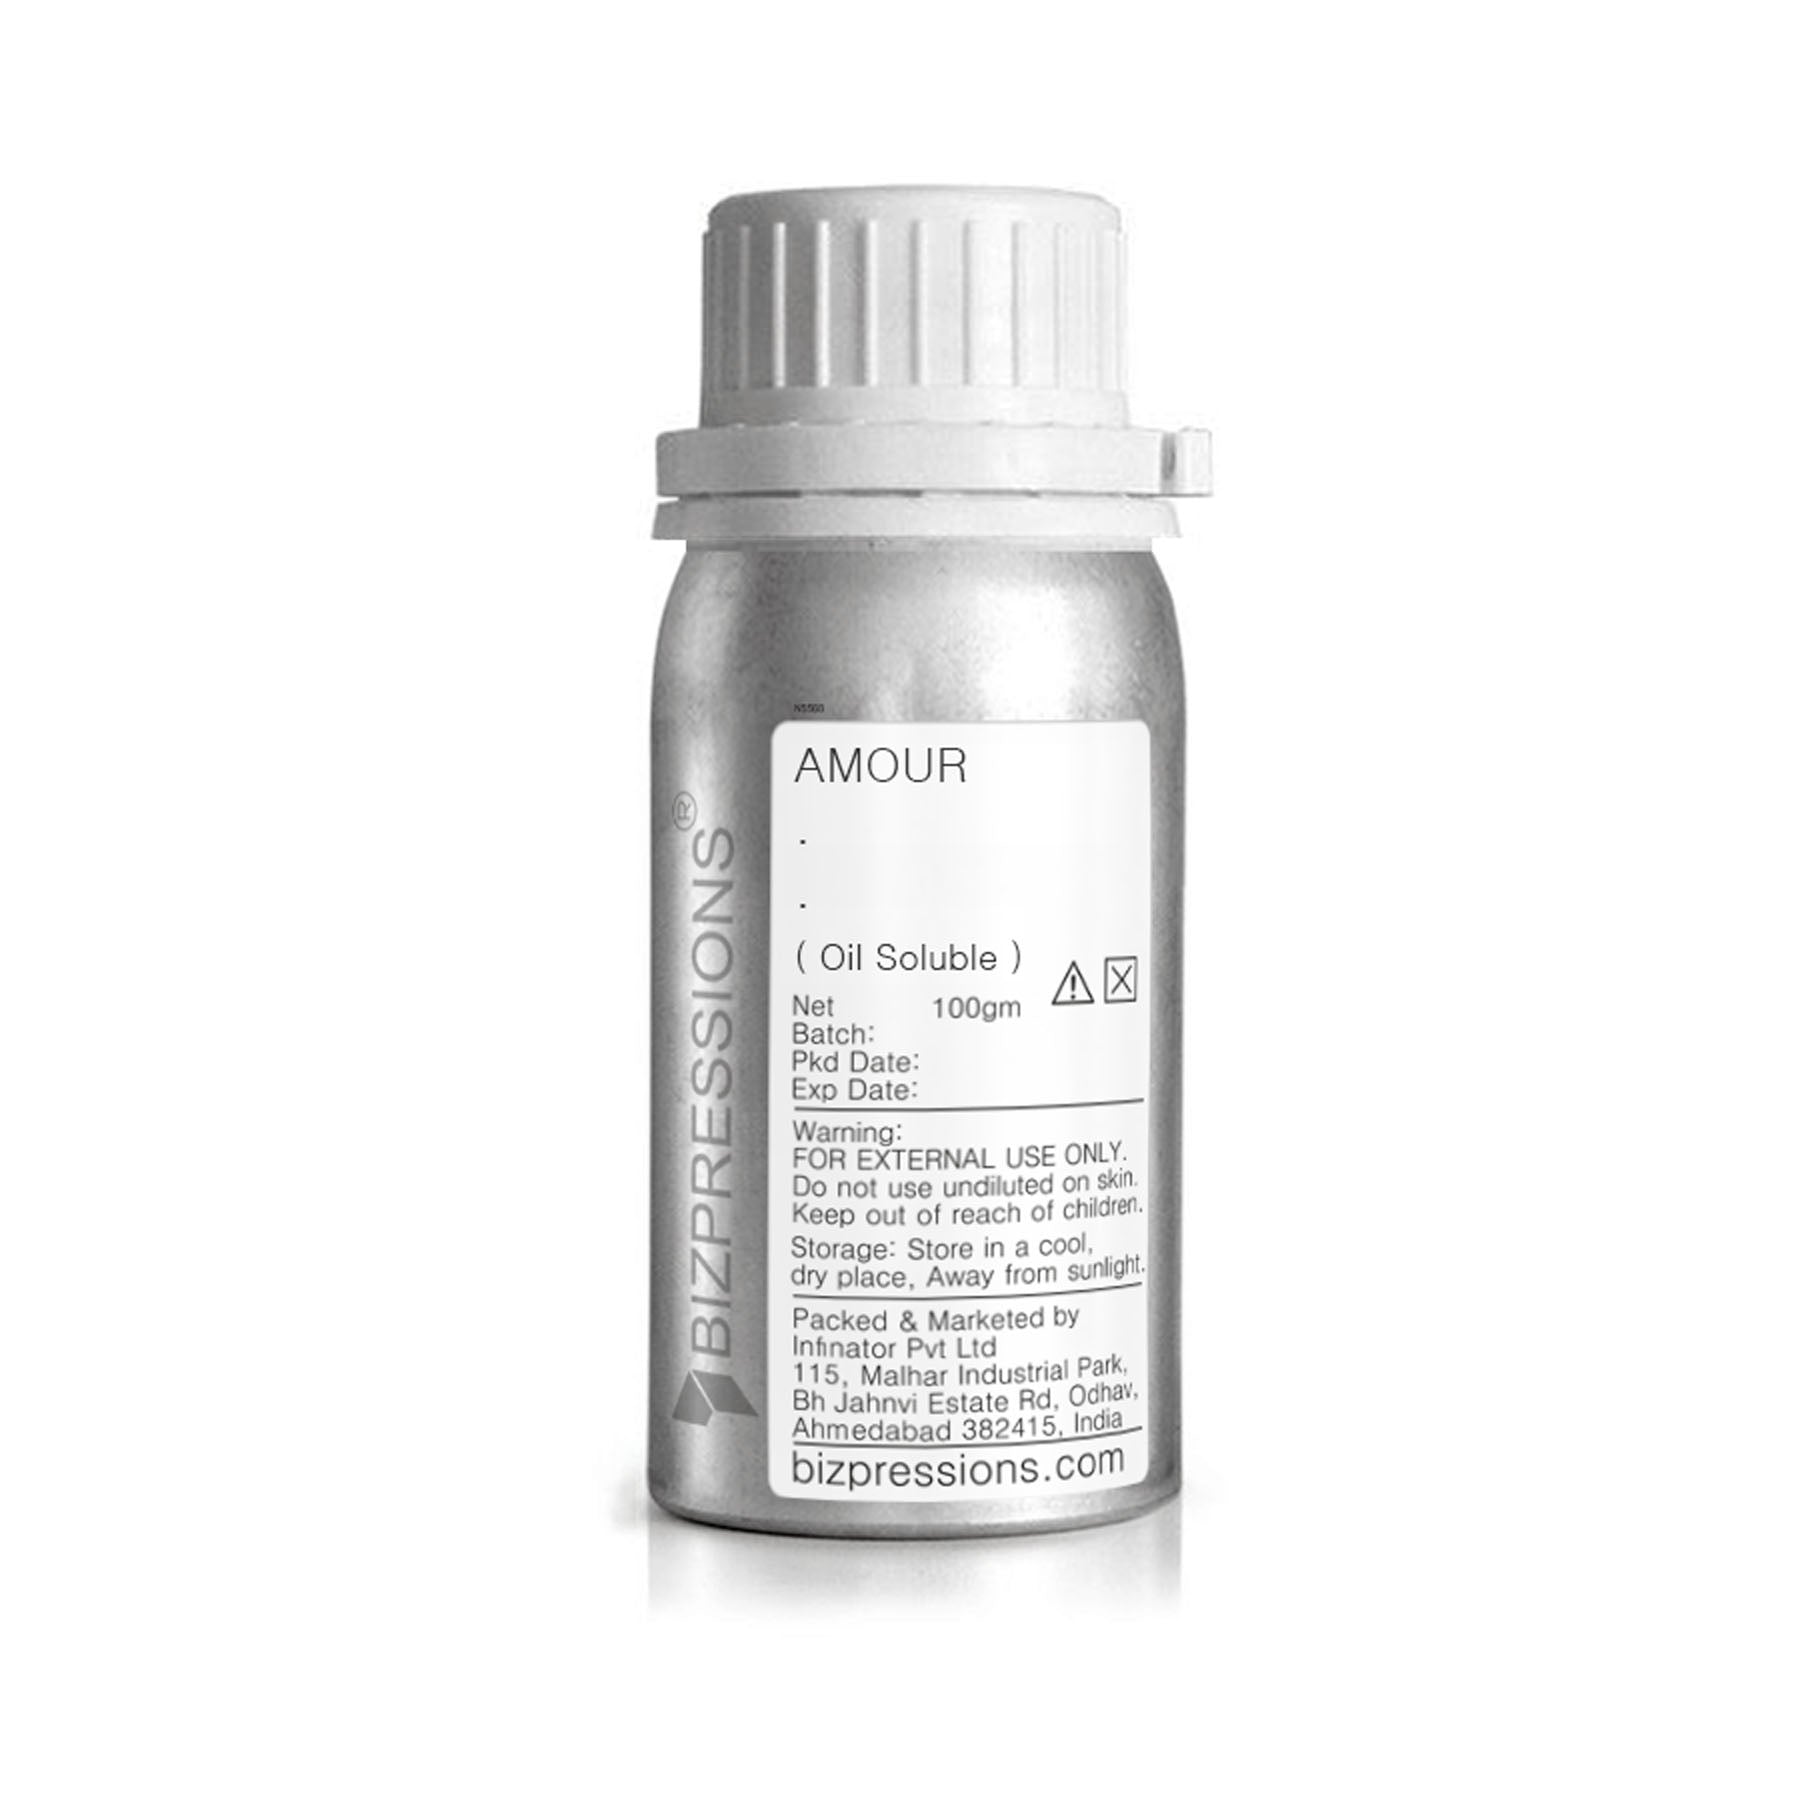 AMOUR - Fragrance ( Oil Soluble ) - 100 gm